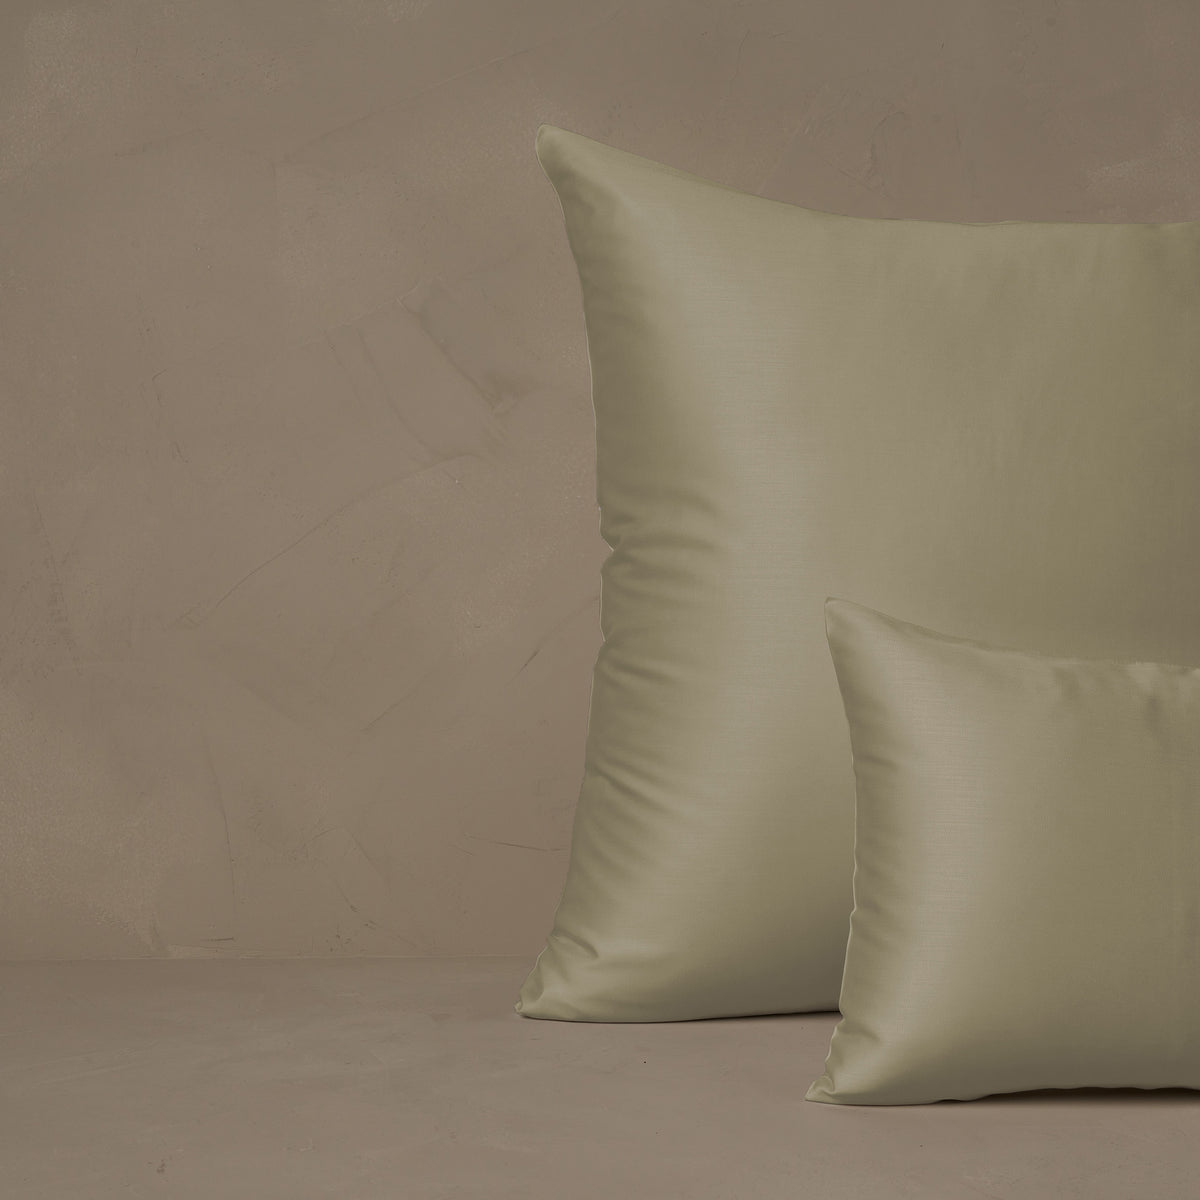 An image of a small boudoir or travel size pillow stacked in front of a large euro size pillow. The pillow cases are made in Italy of LETTO Woodland Silk fabric in color Pistachio, a smooth and silky beechwood modal. data-image-id=